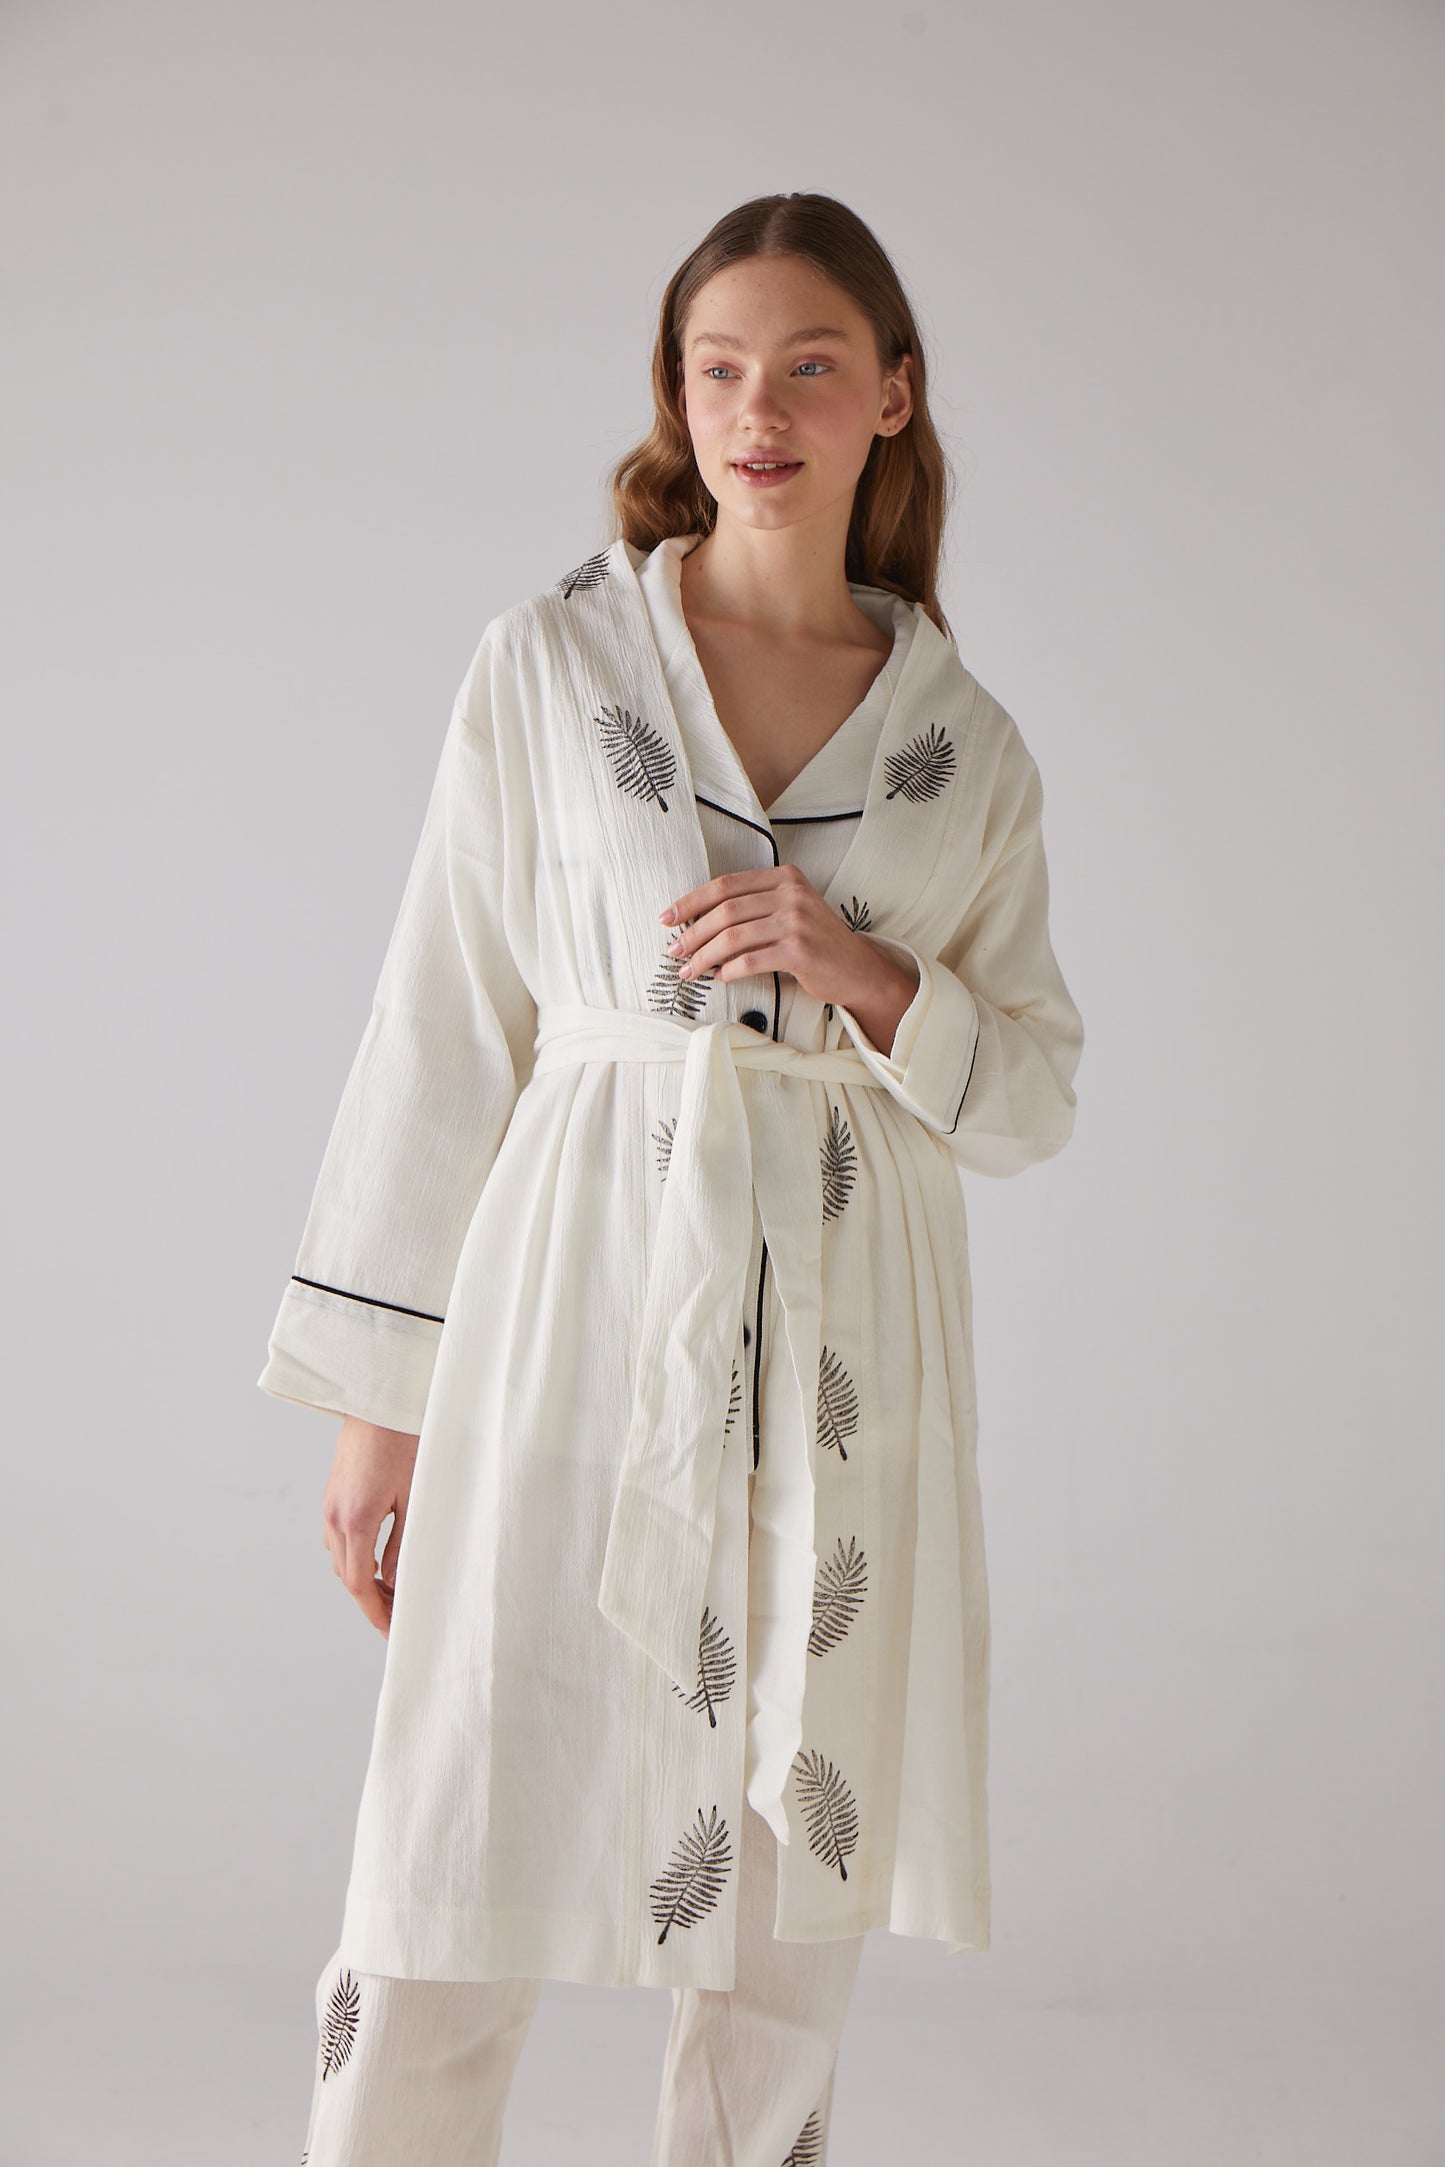 Leaf woodcut patterned Morning-gown in white 100% organic cotton